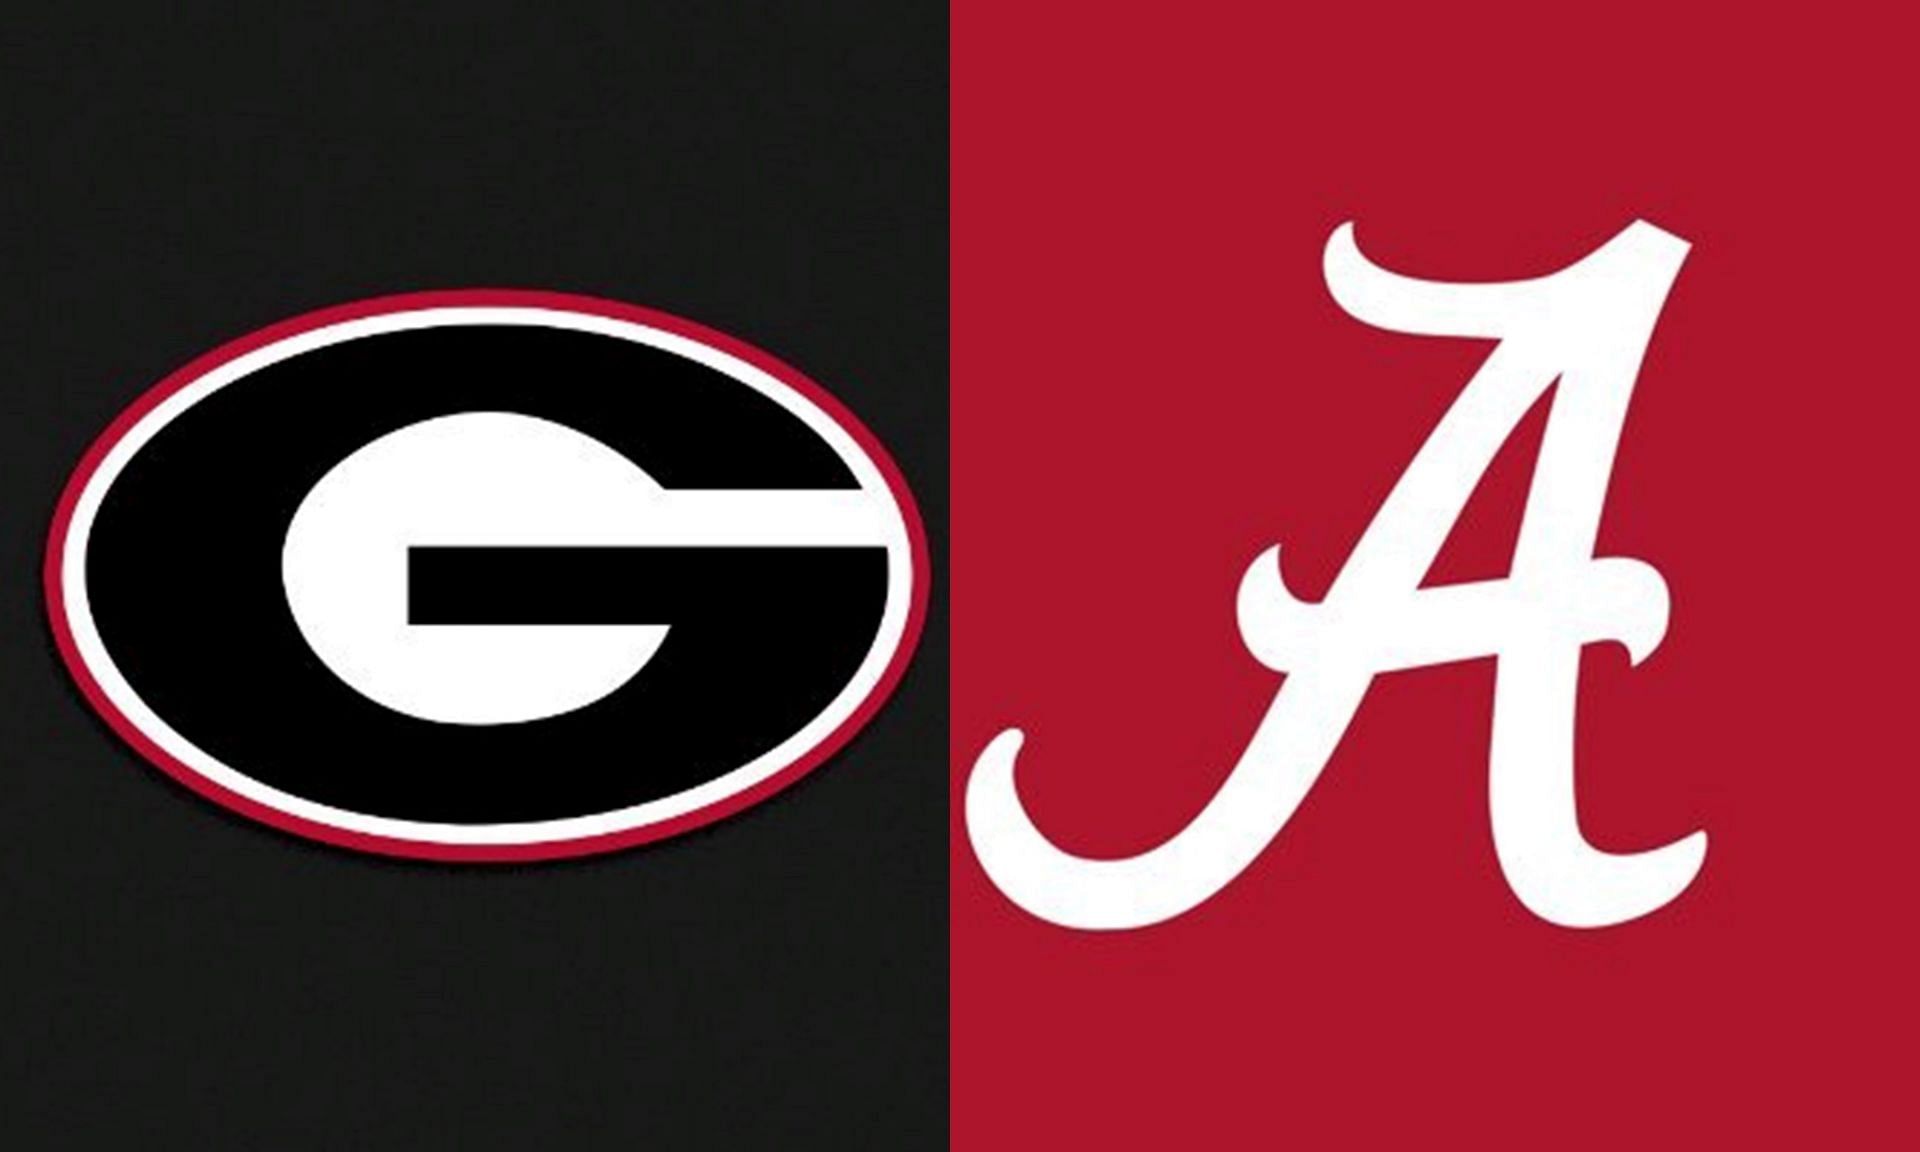 The No. 1 Georgia Bulldogs clashed with the No. 8 Alabama Crimson Tide on a vibrant Saturday afternoon.